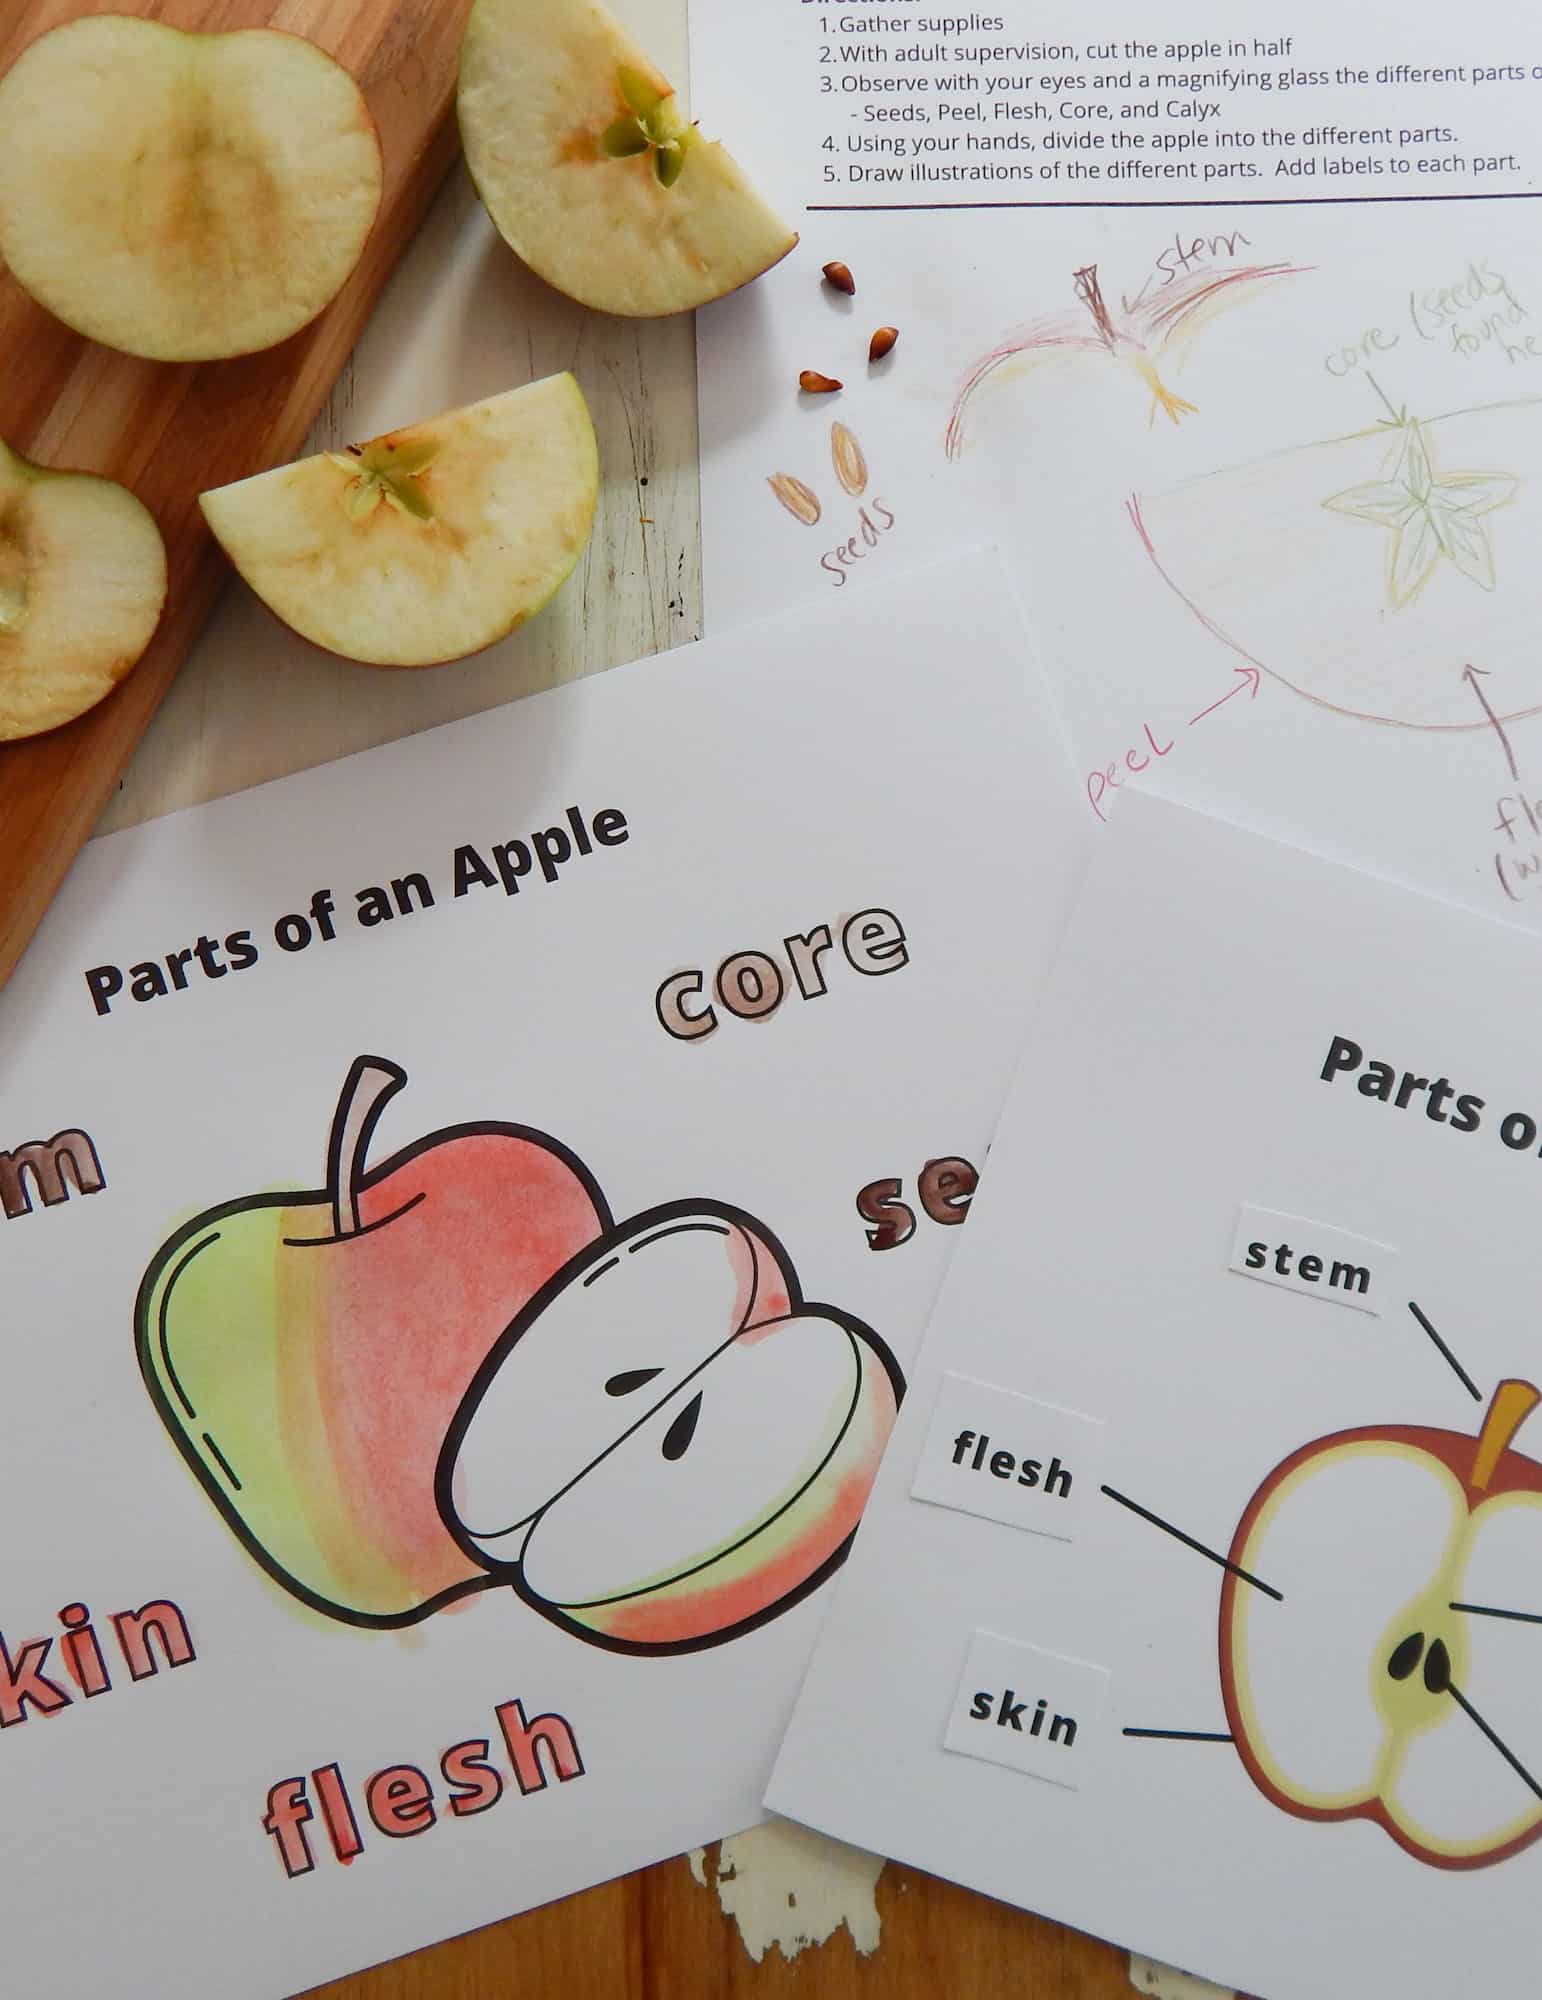 parts of an apple worksheets, diagrams, and cut and past worksheet on a wooden table with cut up pieces of an apple on wooden cutting board and table